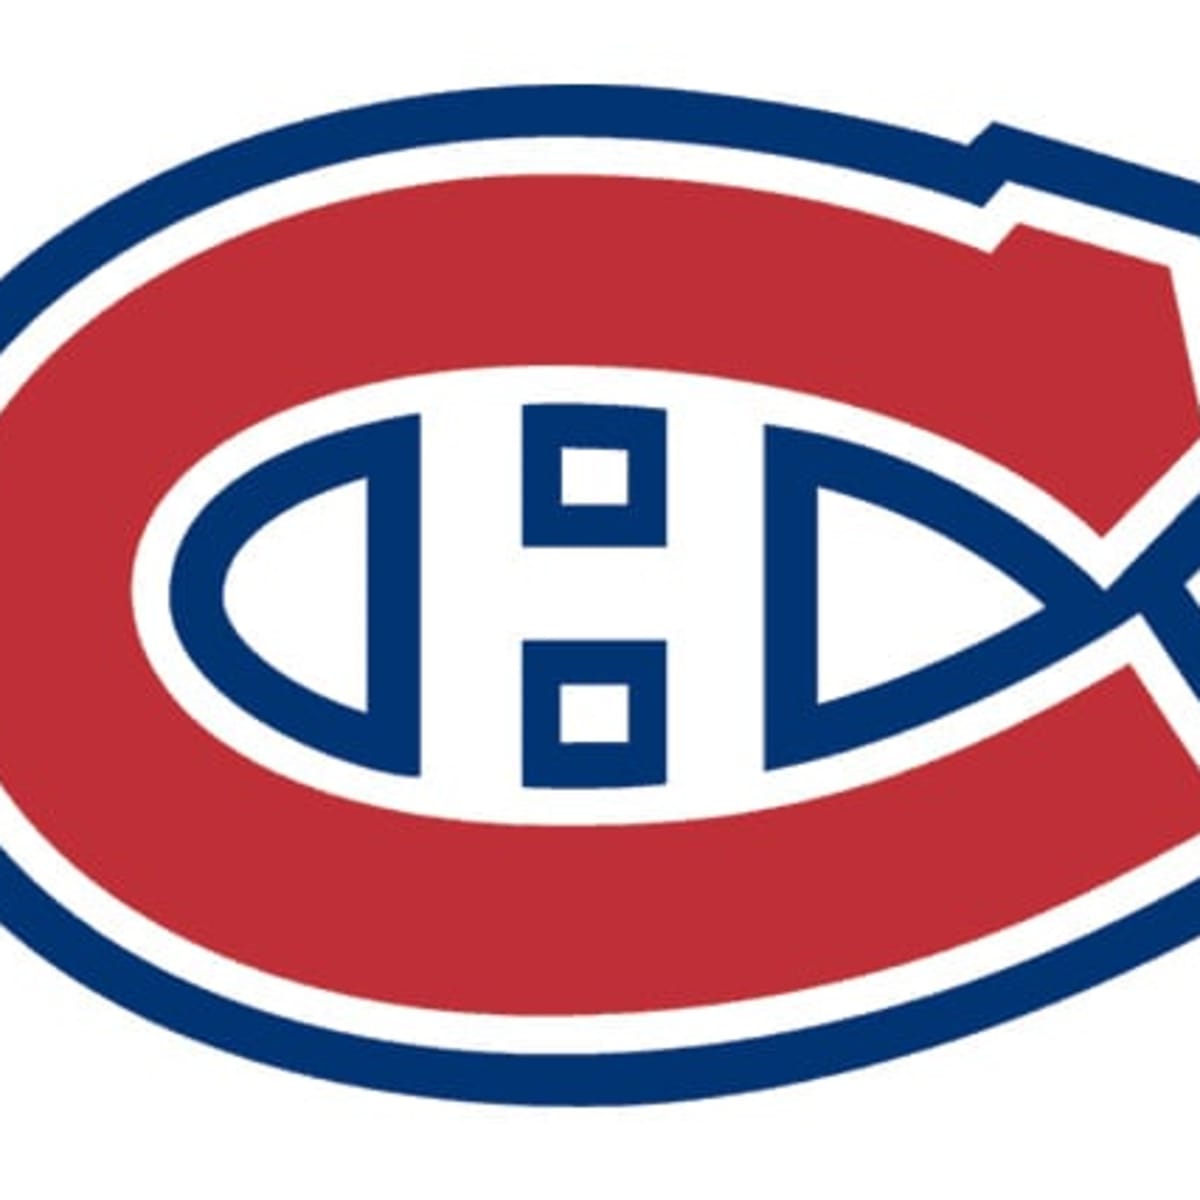 What does the C and H on the Habs Jerseys Stand For?